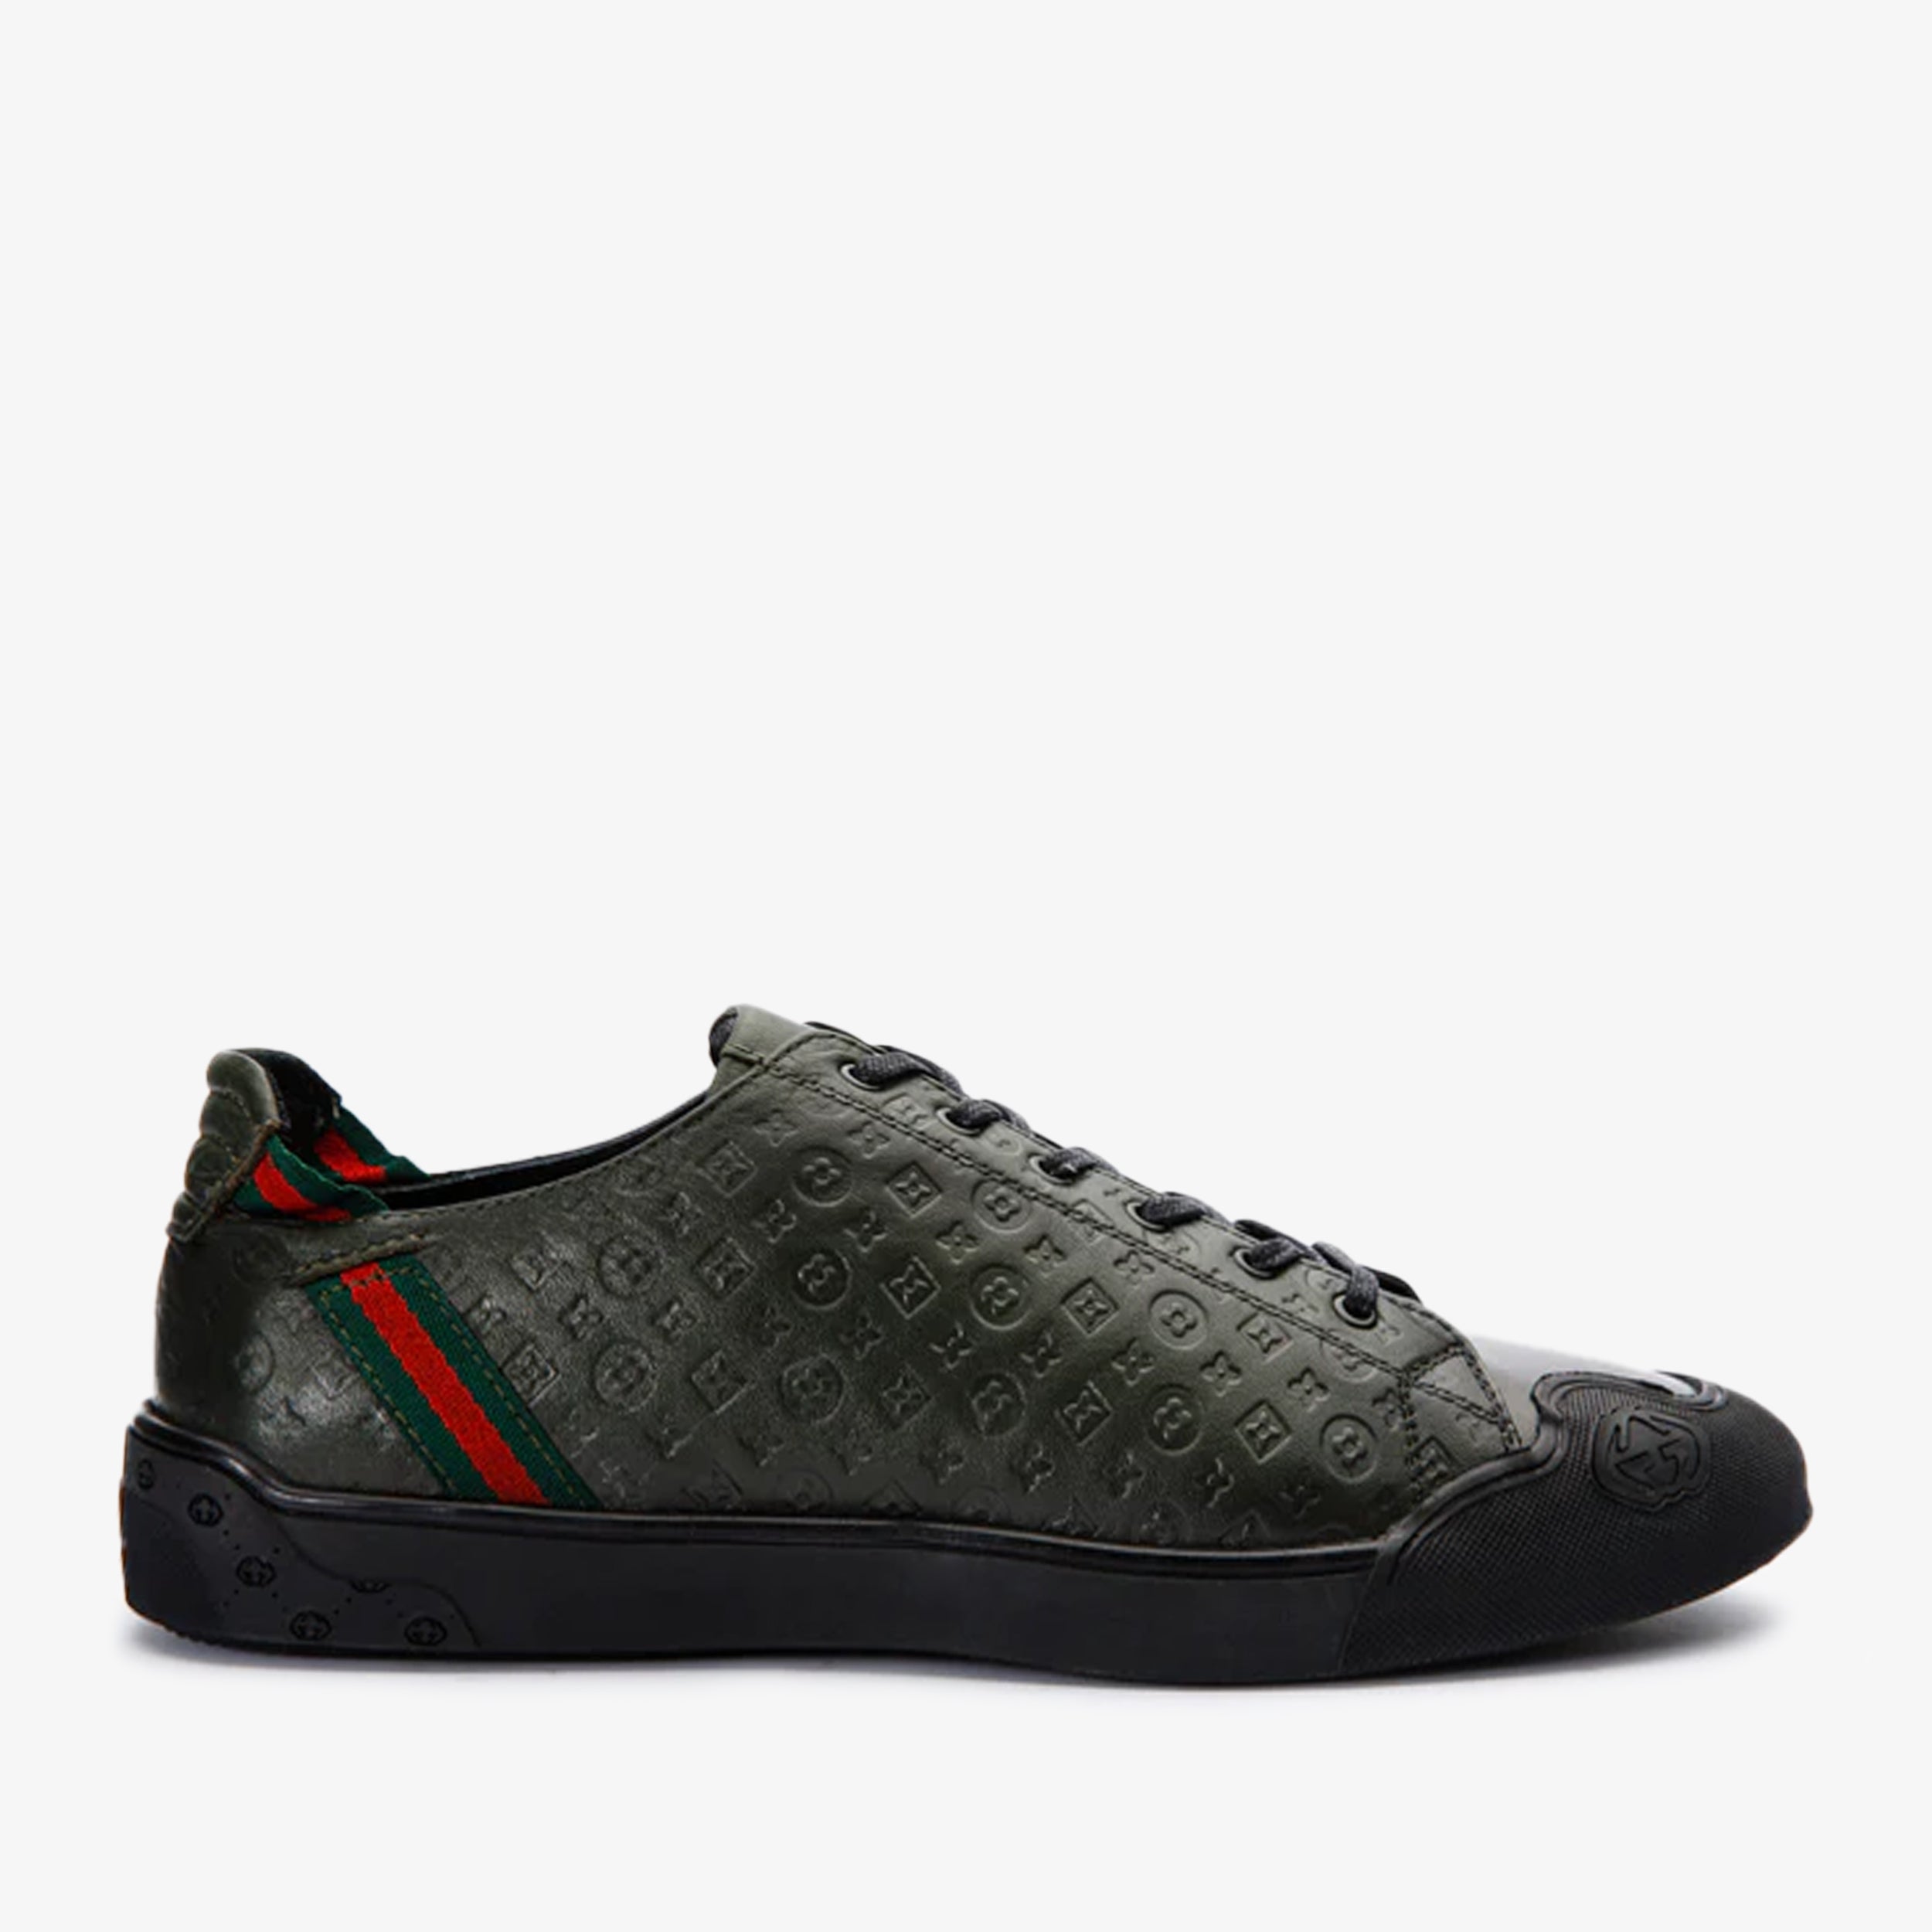 The Getto Green Leather Men Sneaker